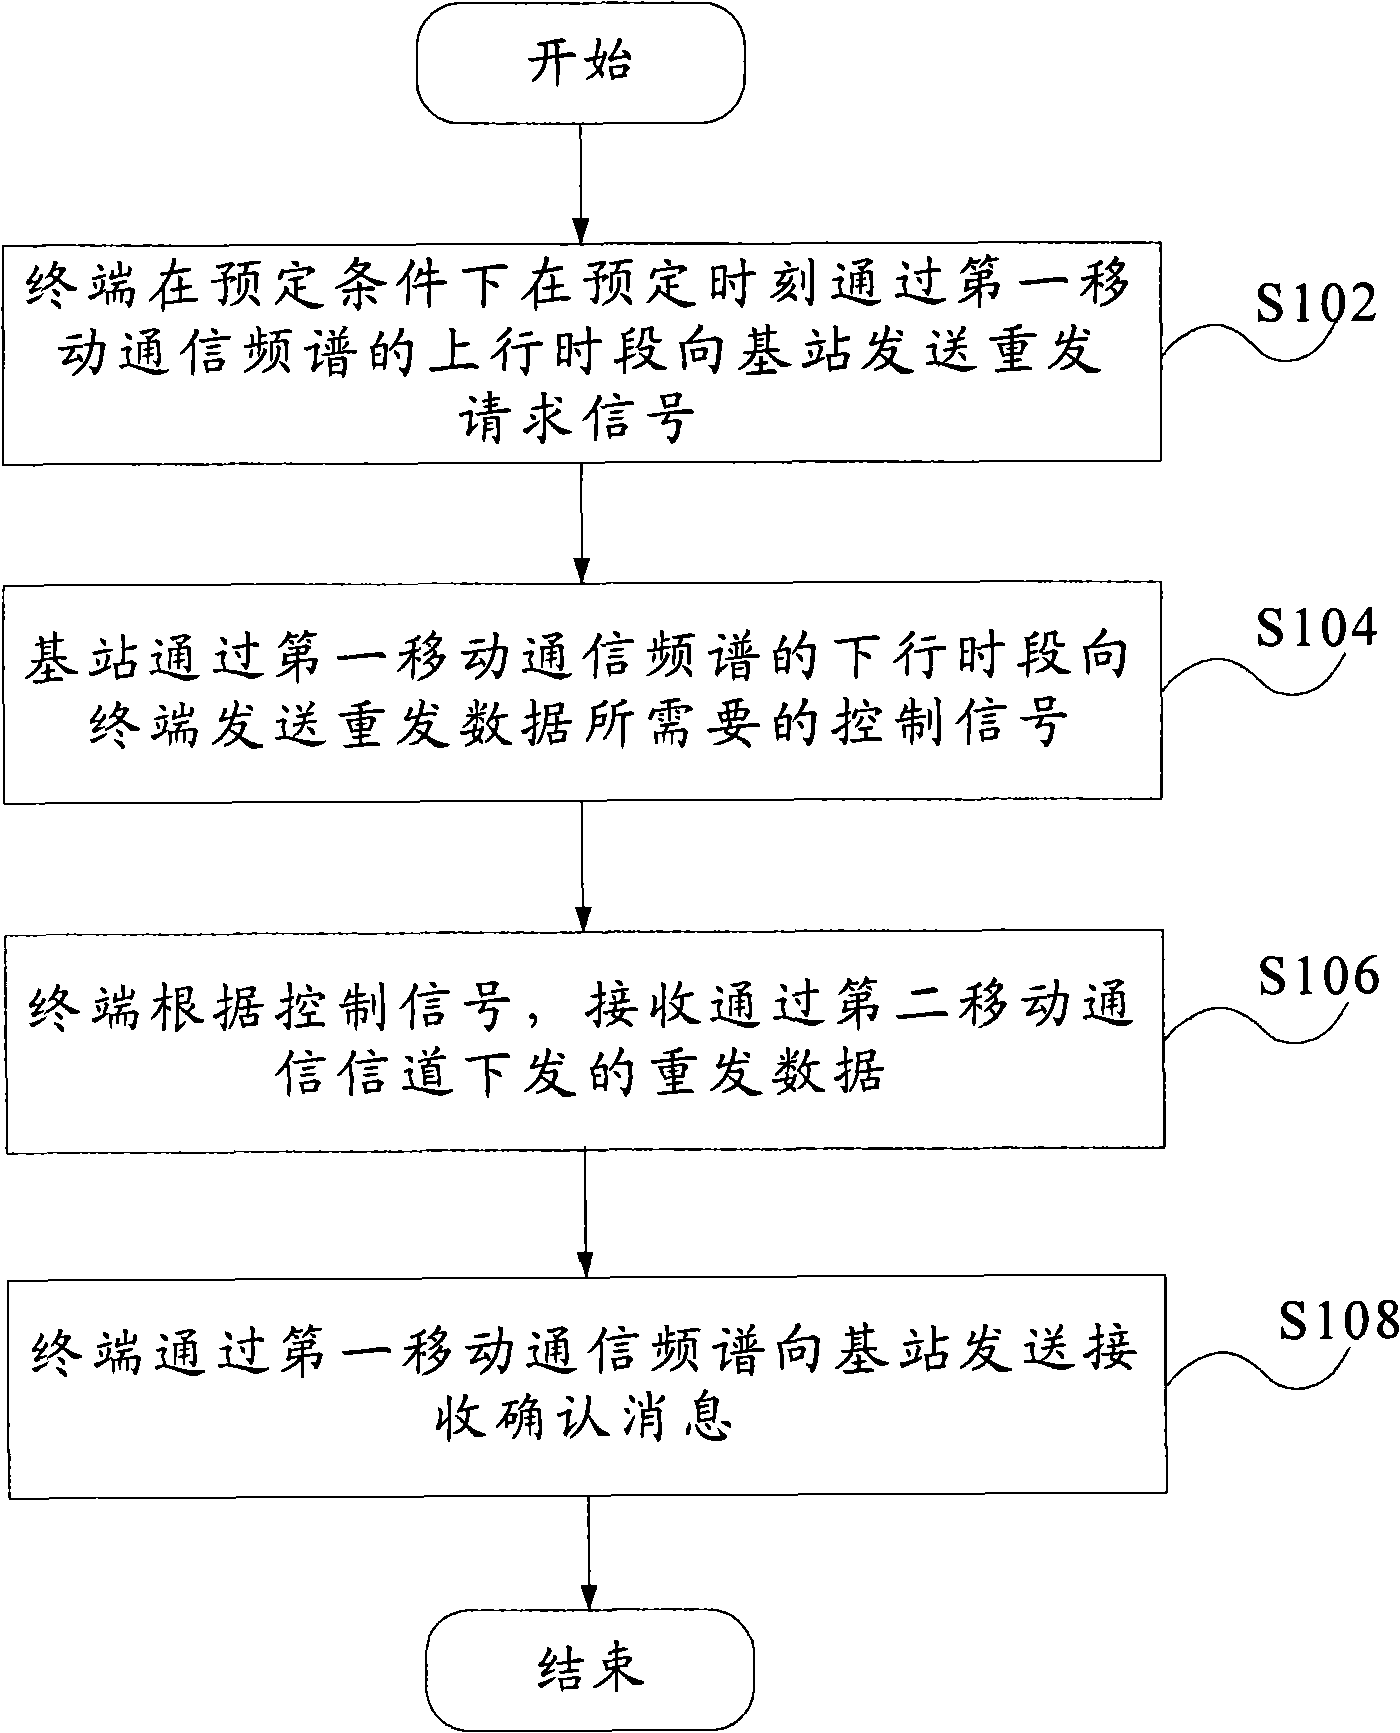 Retransmitting method of broadcasted data in network of single frequency